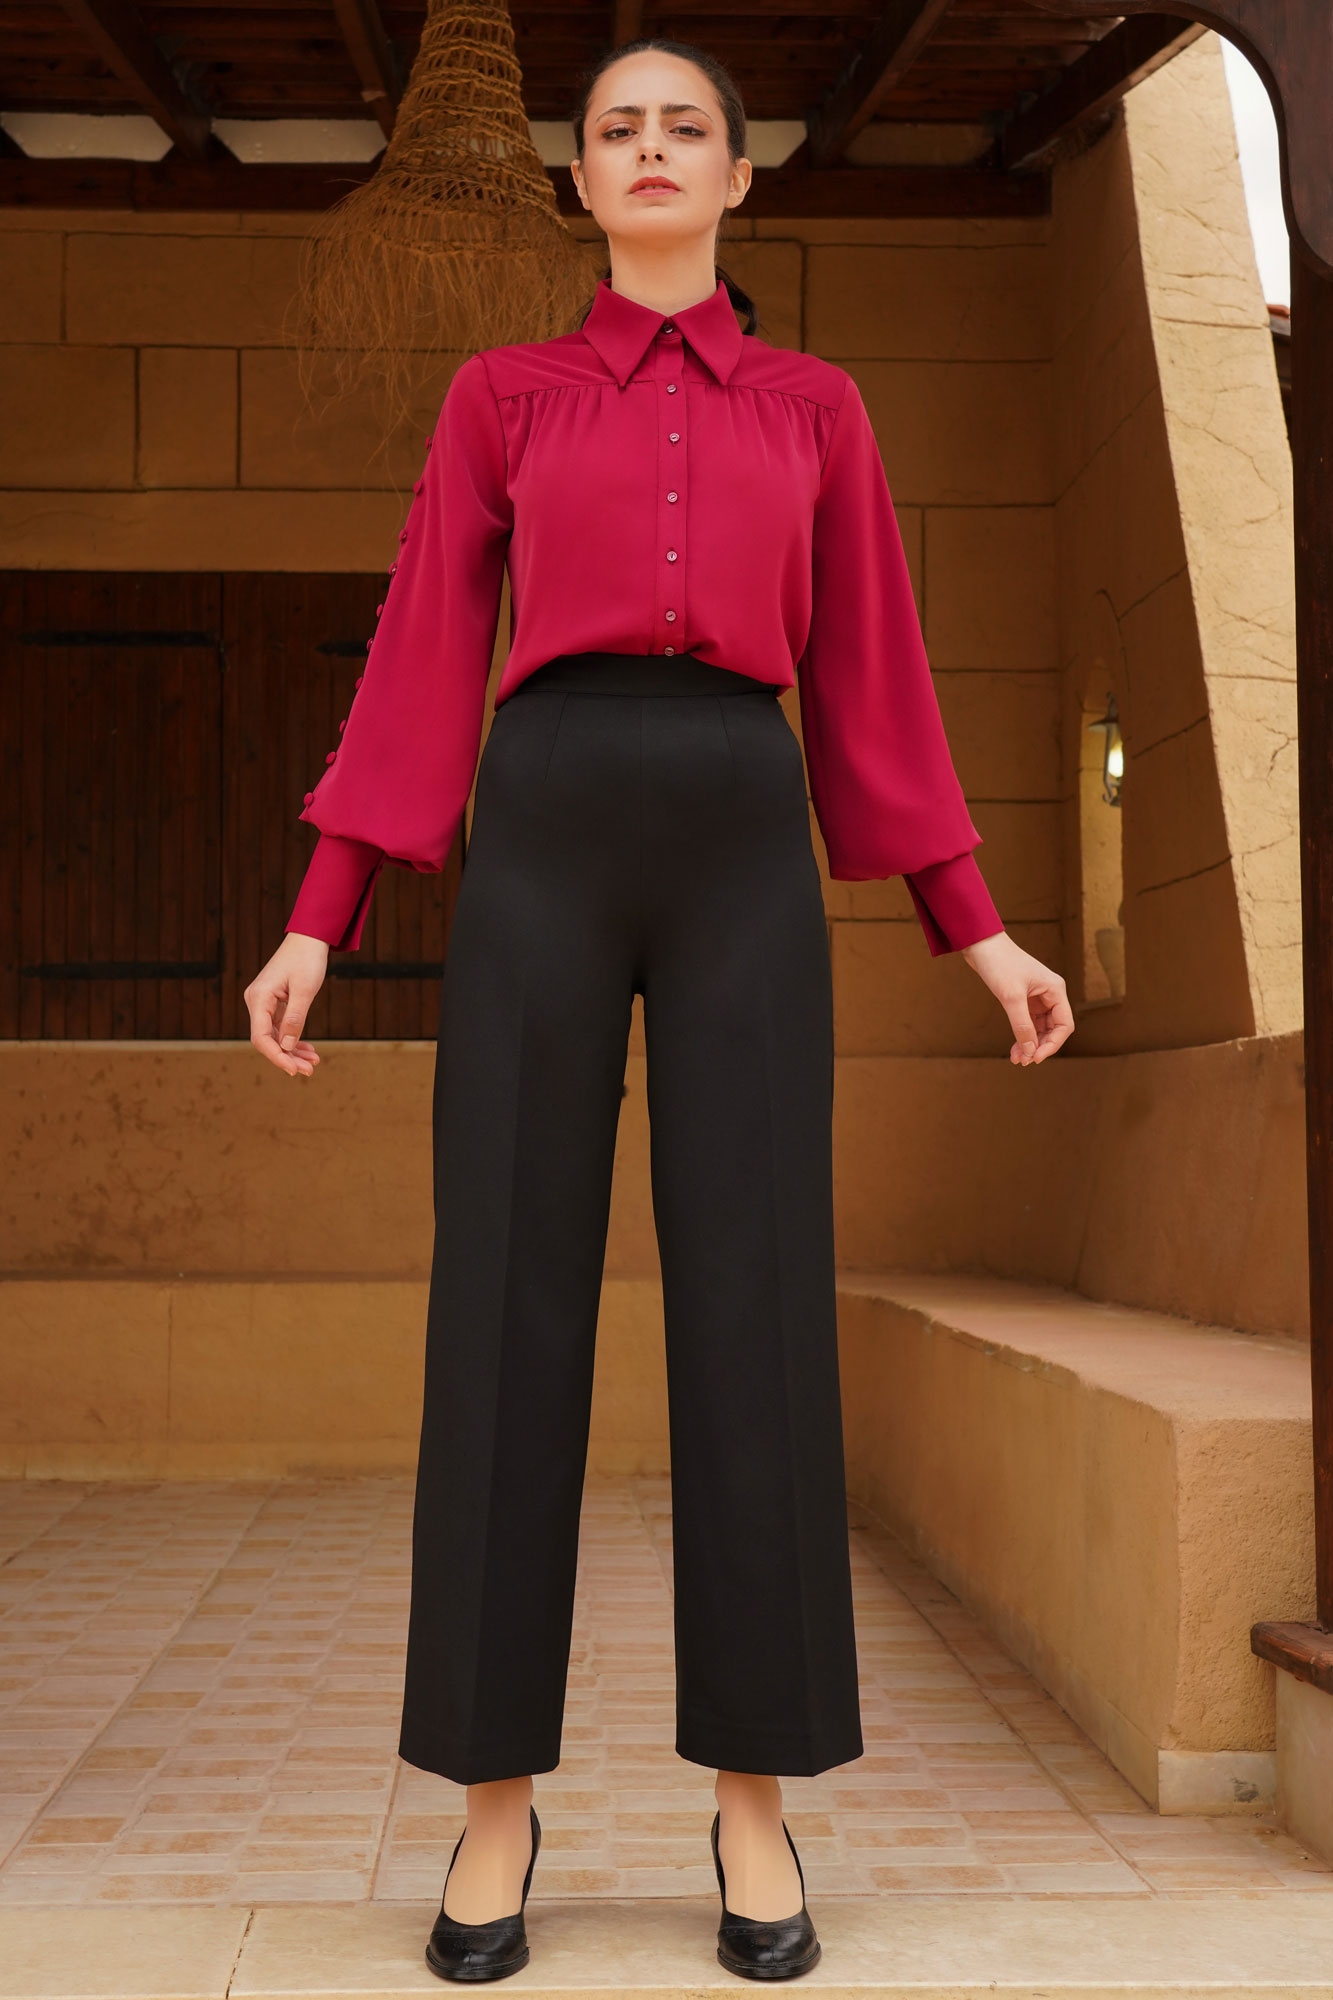 Two Pieces Red Shirt With Buttons And Black Pants